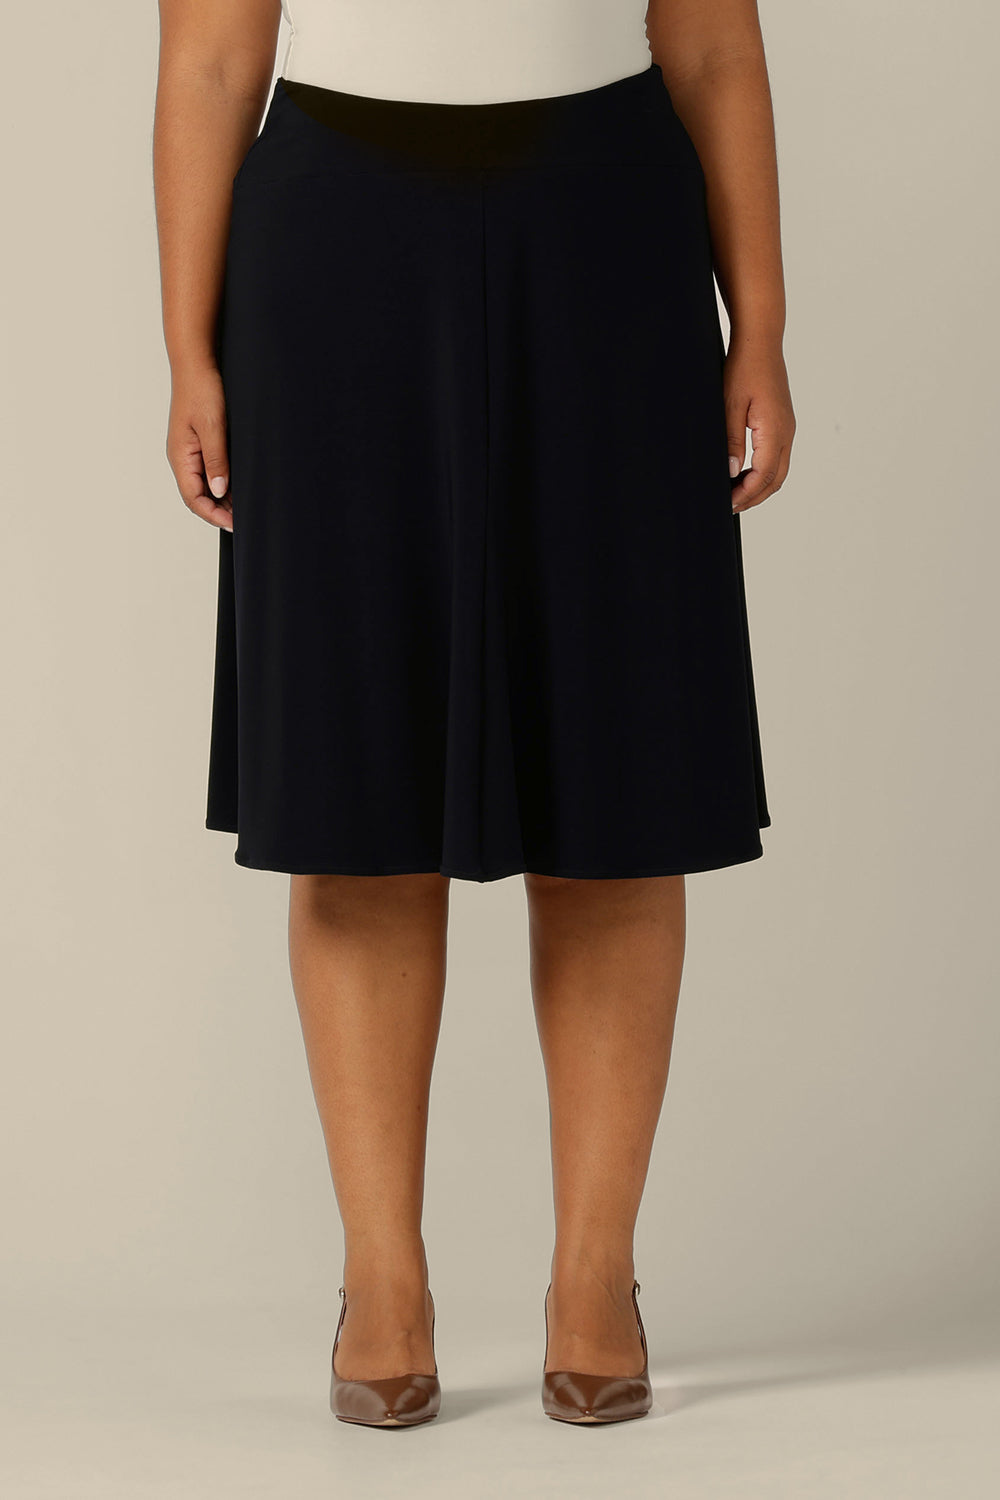 A fuller figure, size 18 woman wears a knee length pull-on skirt in navy jersey by Australian and New Zealand women's clothing brand, L&F. A classic skirt for comfortable work wear or smart casual wear.